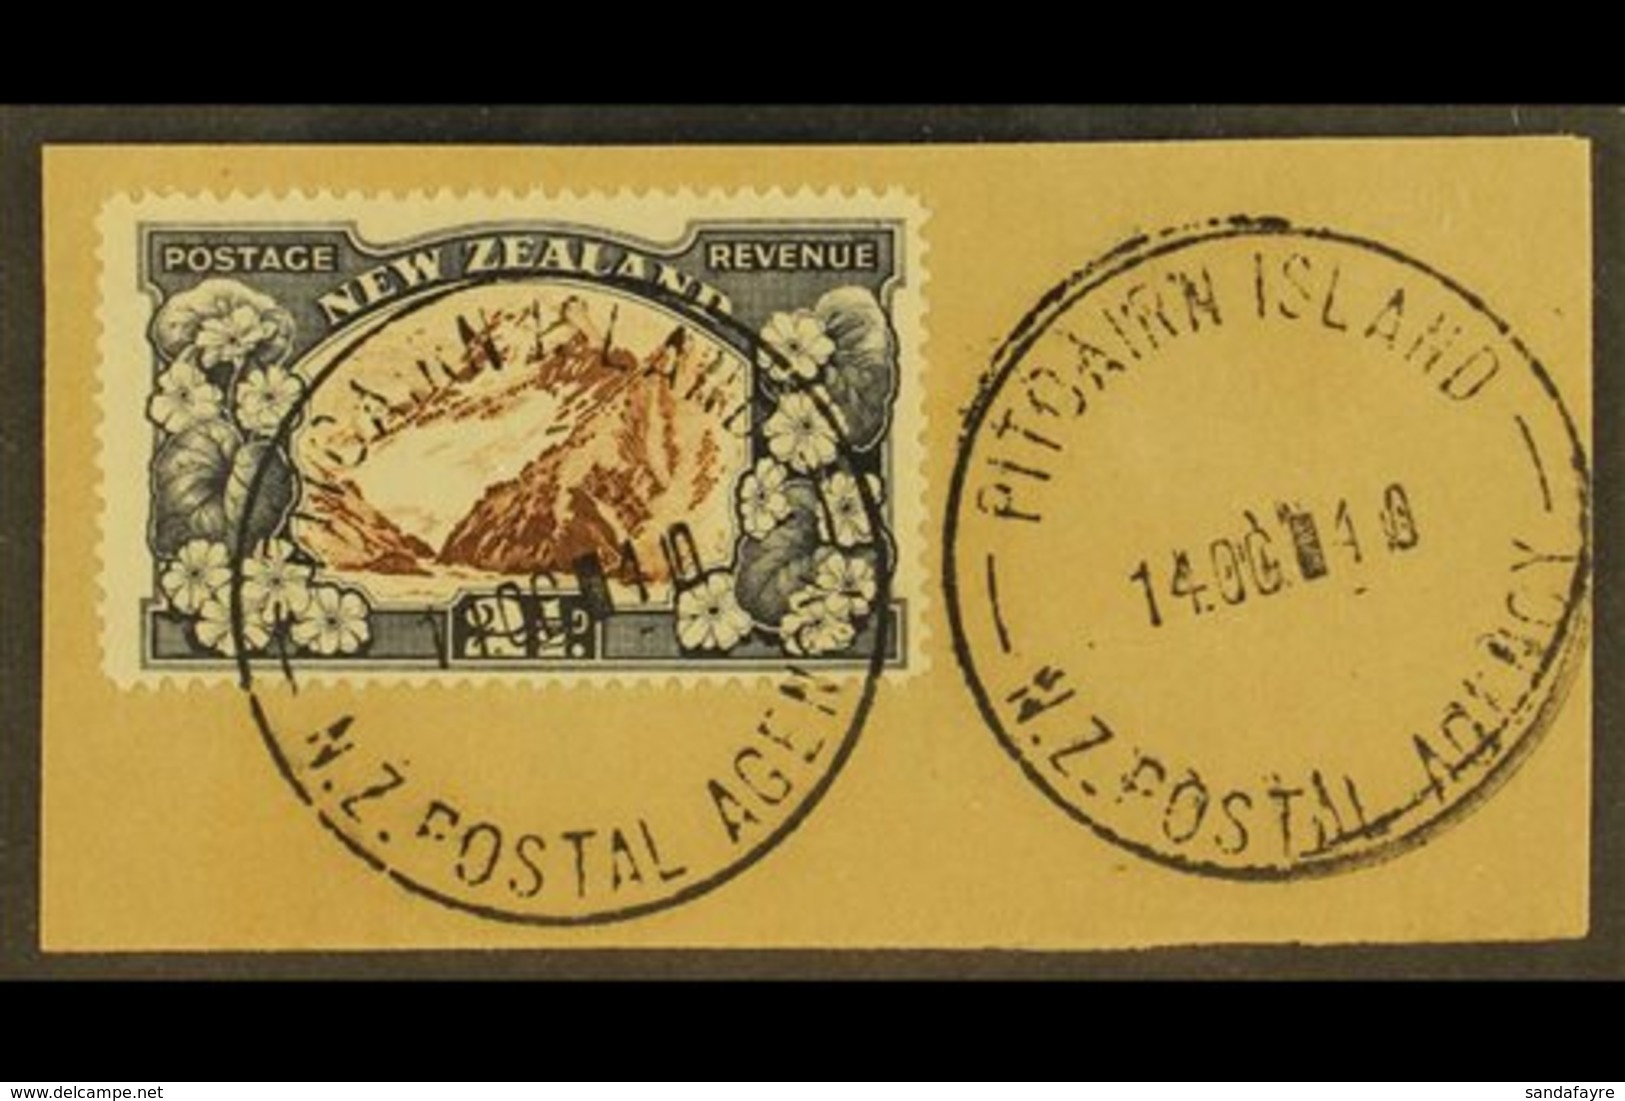 1935 2½d Chocolate And Slate Pictorial Of New Zealand, On Piece Tied By Fine Full "PITCAIRN ISLAND" Cds Cancels Of 14 OC - Pitcairn Islands